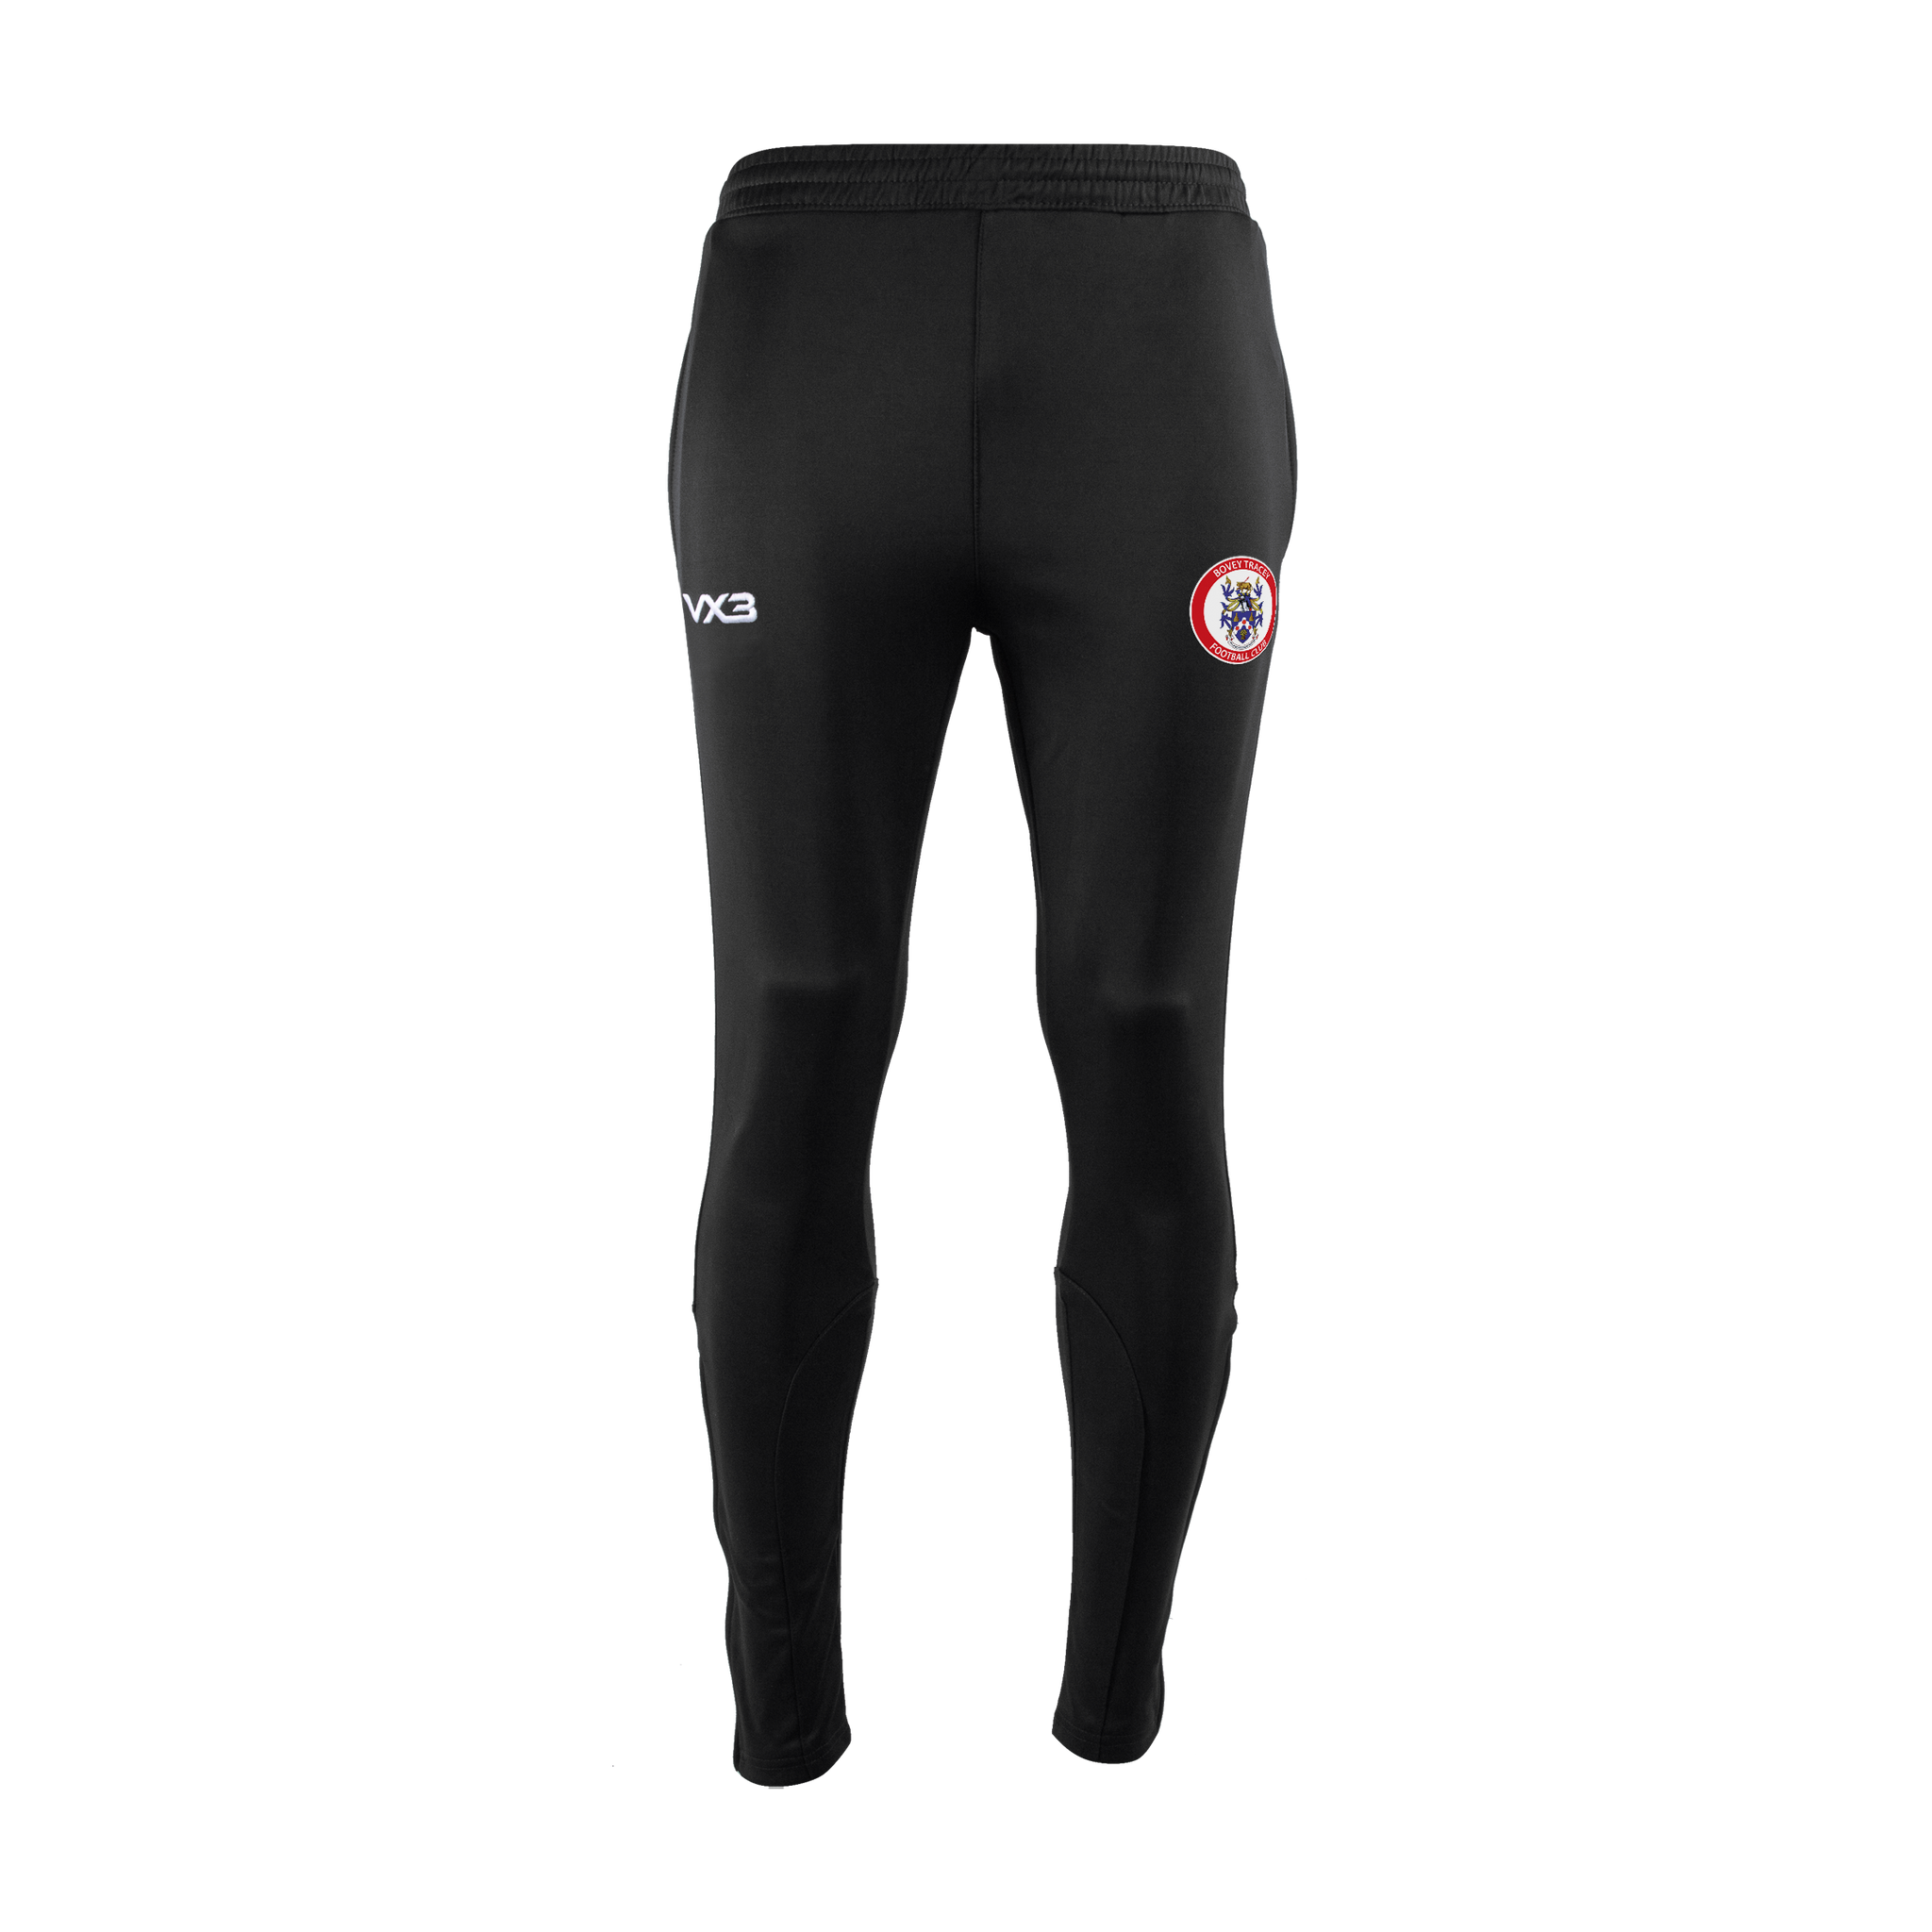 Bovey Tracey AFC Primus Skinny Pants